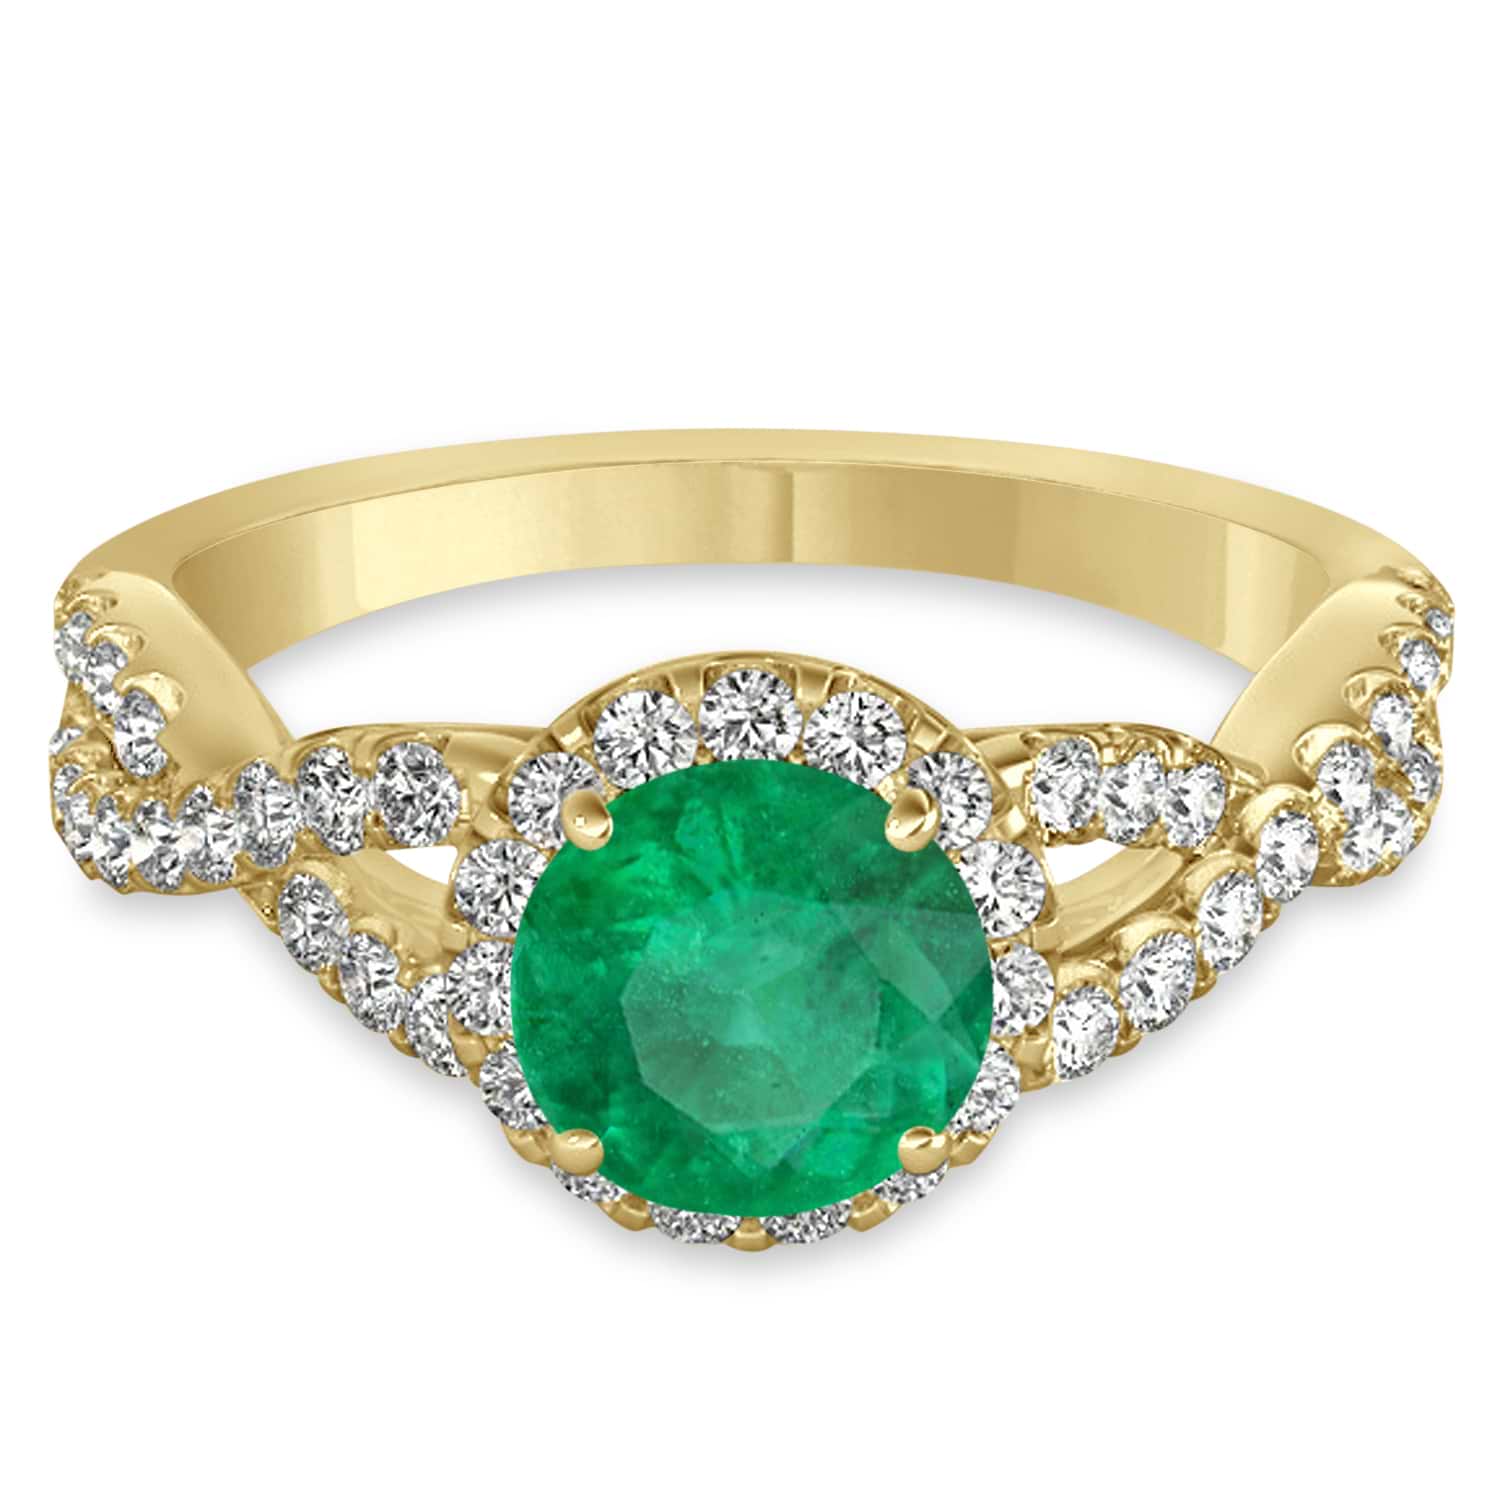 Emerald & Diamond Twisted Engagement Ring 18k Yellow Gold 1.30ct